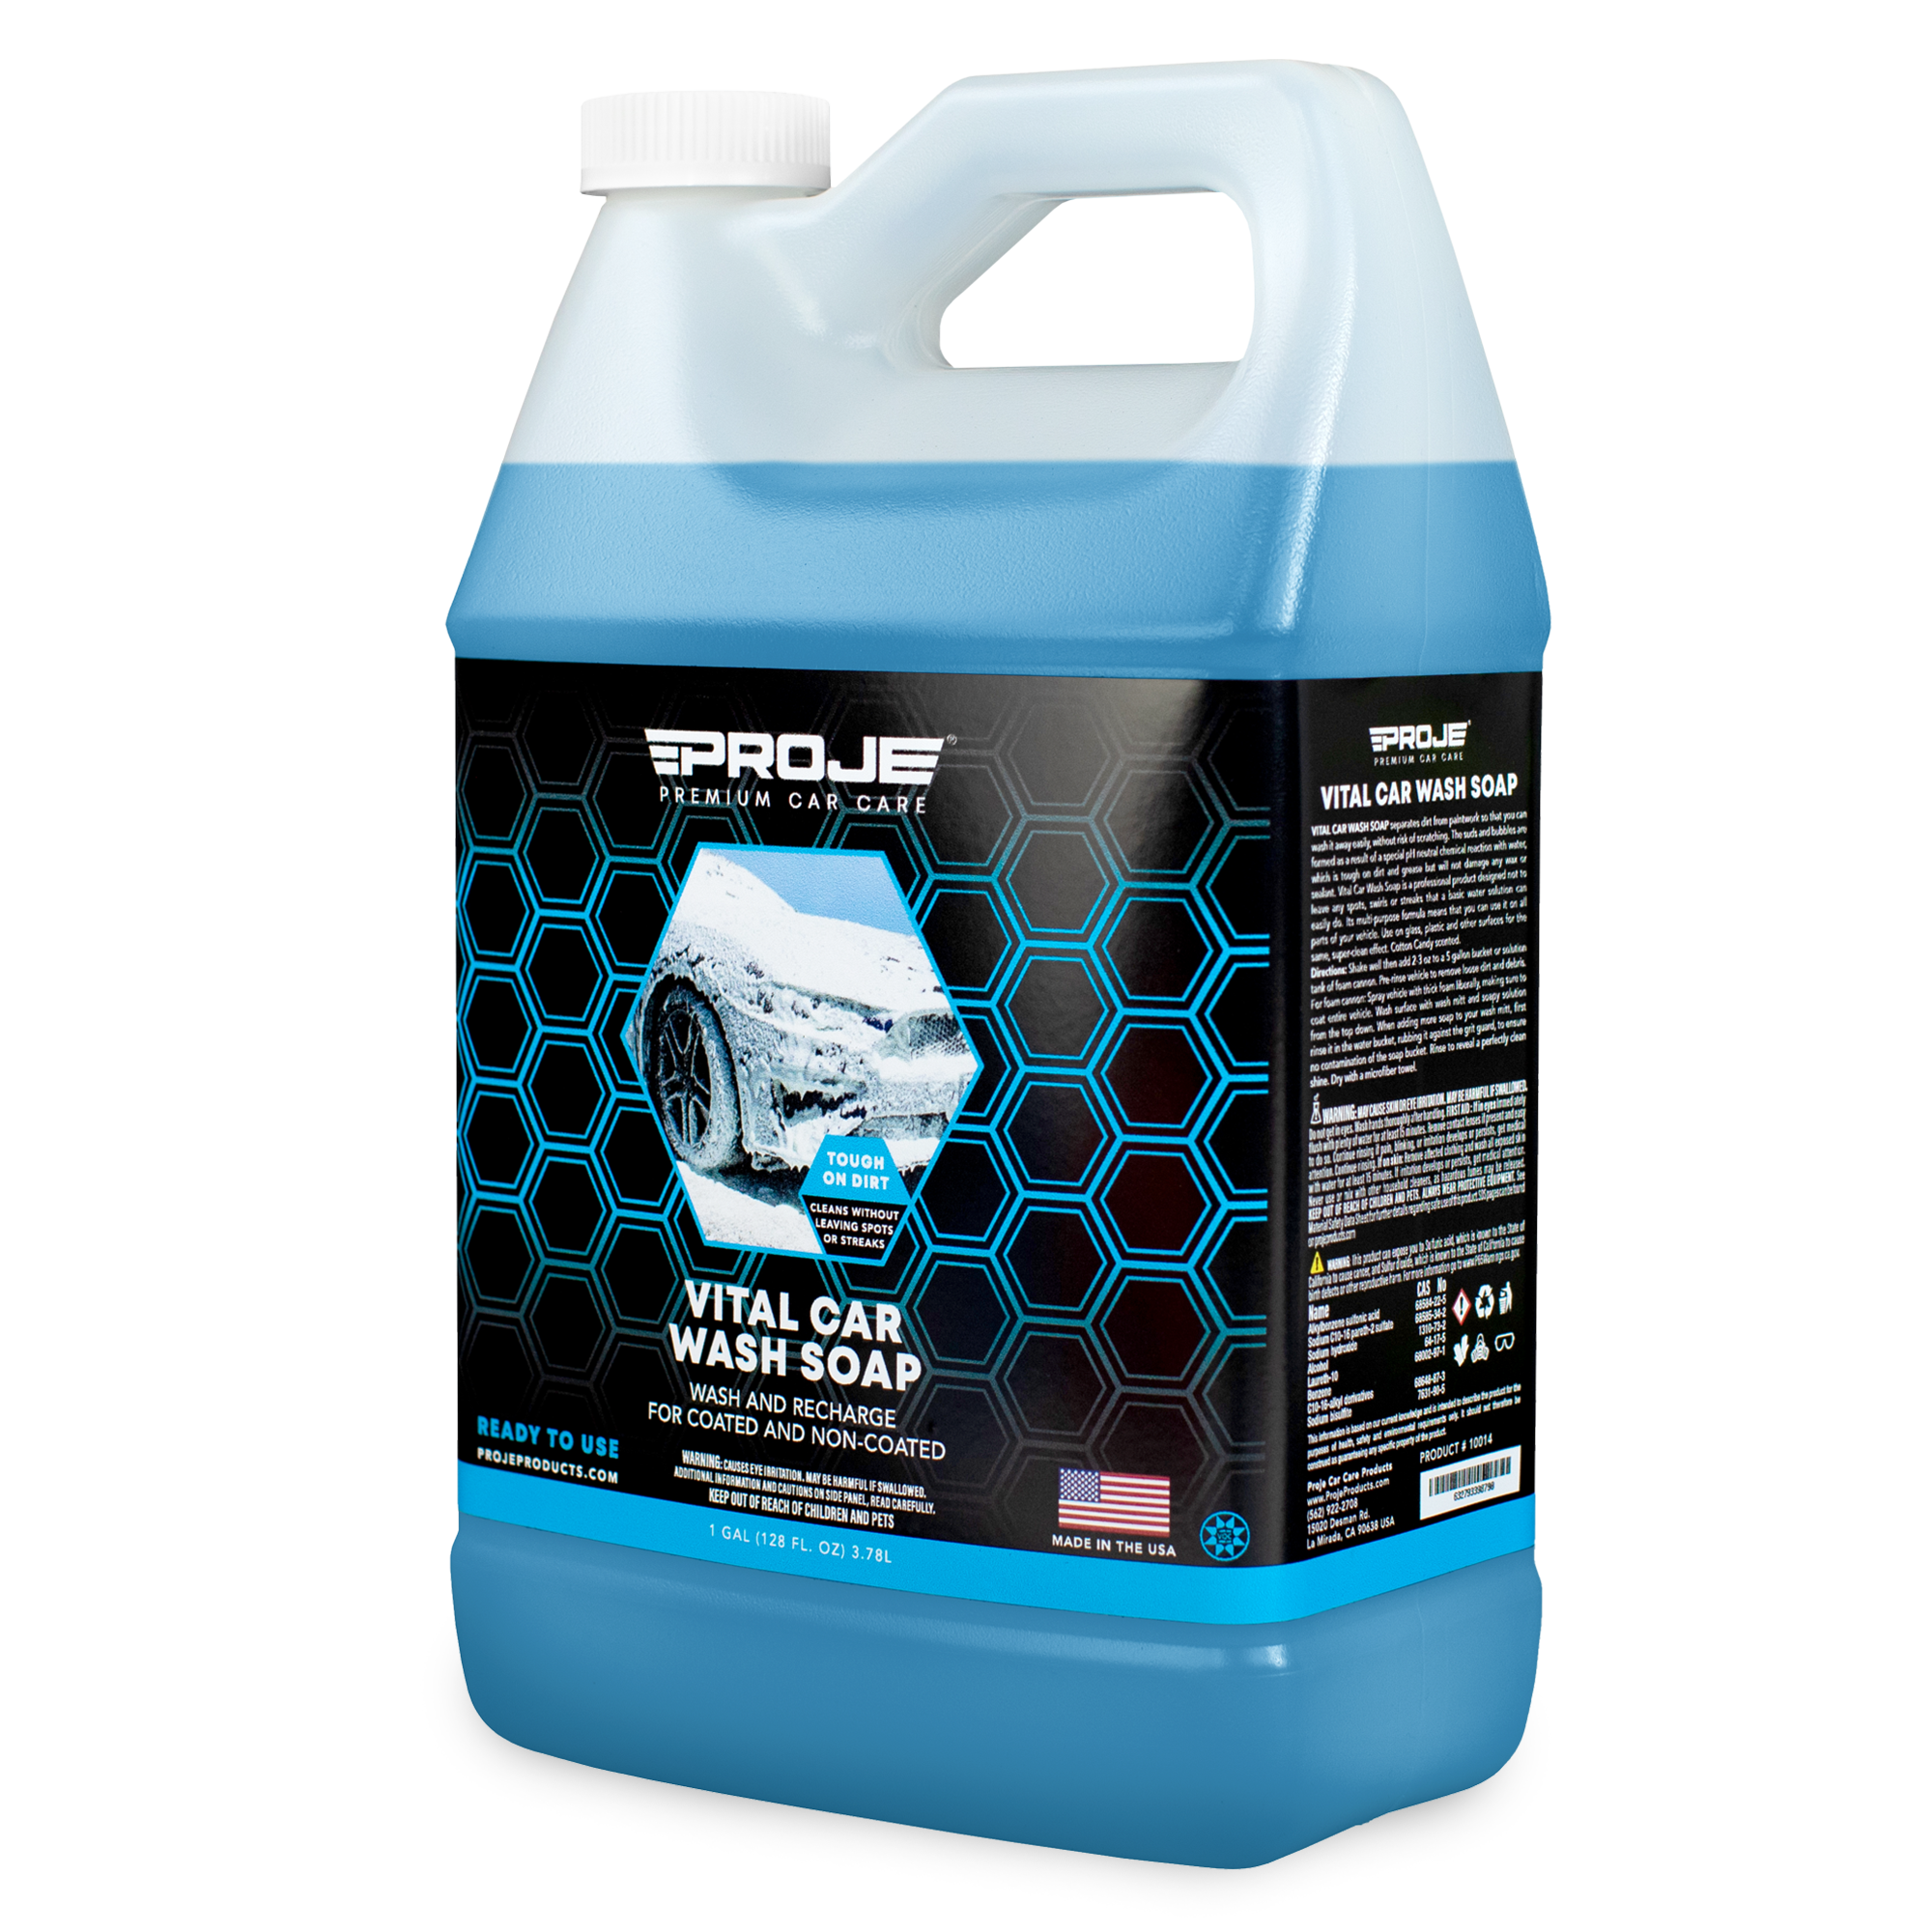 Car Wash Gallon - Soap and Conditioner Clean and Condition Paint Without Damaging Wax Protection - 1 Gallon 128oz Trinova